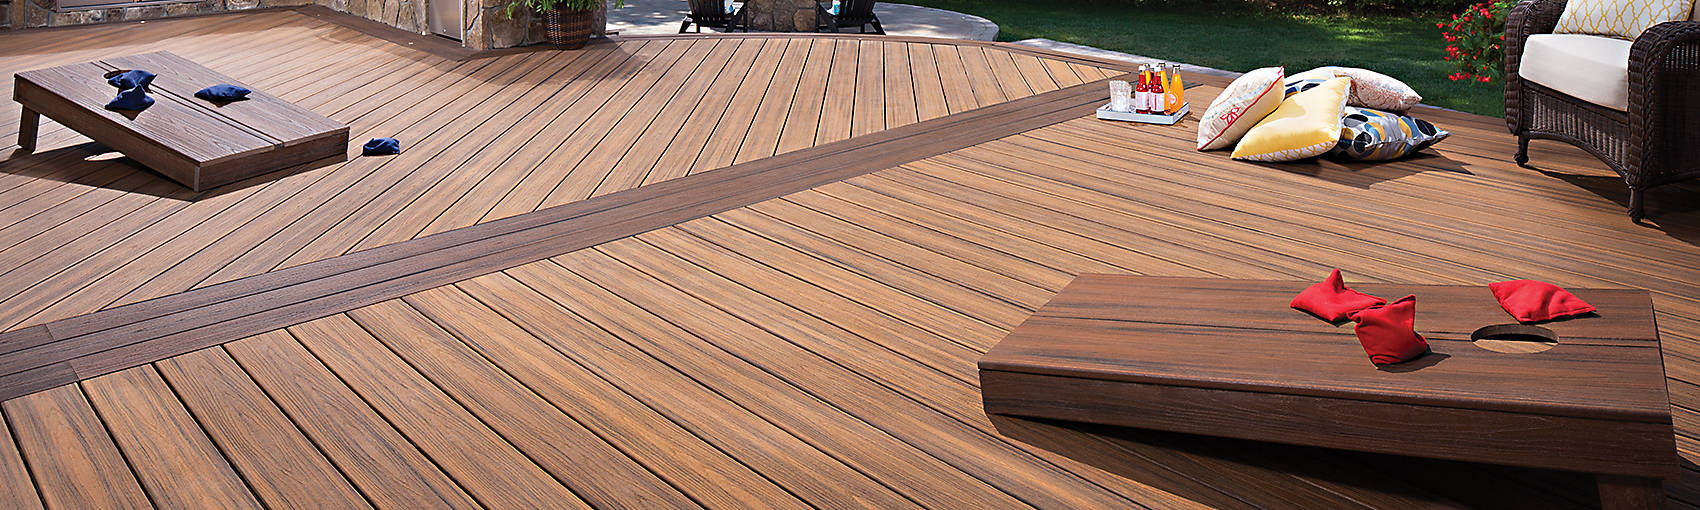 Composite Decking Wpc Wood Alternative Decking Trex in dimensions 1700 X 510